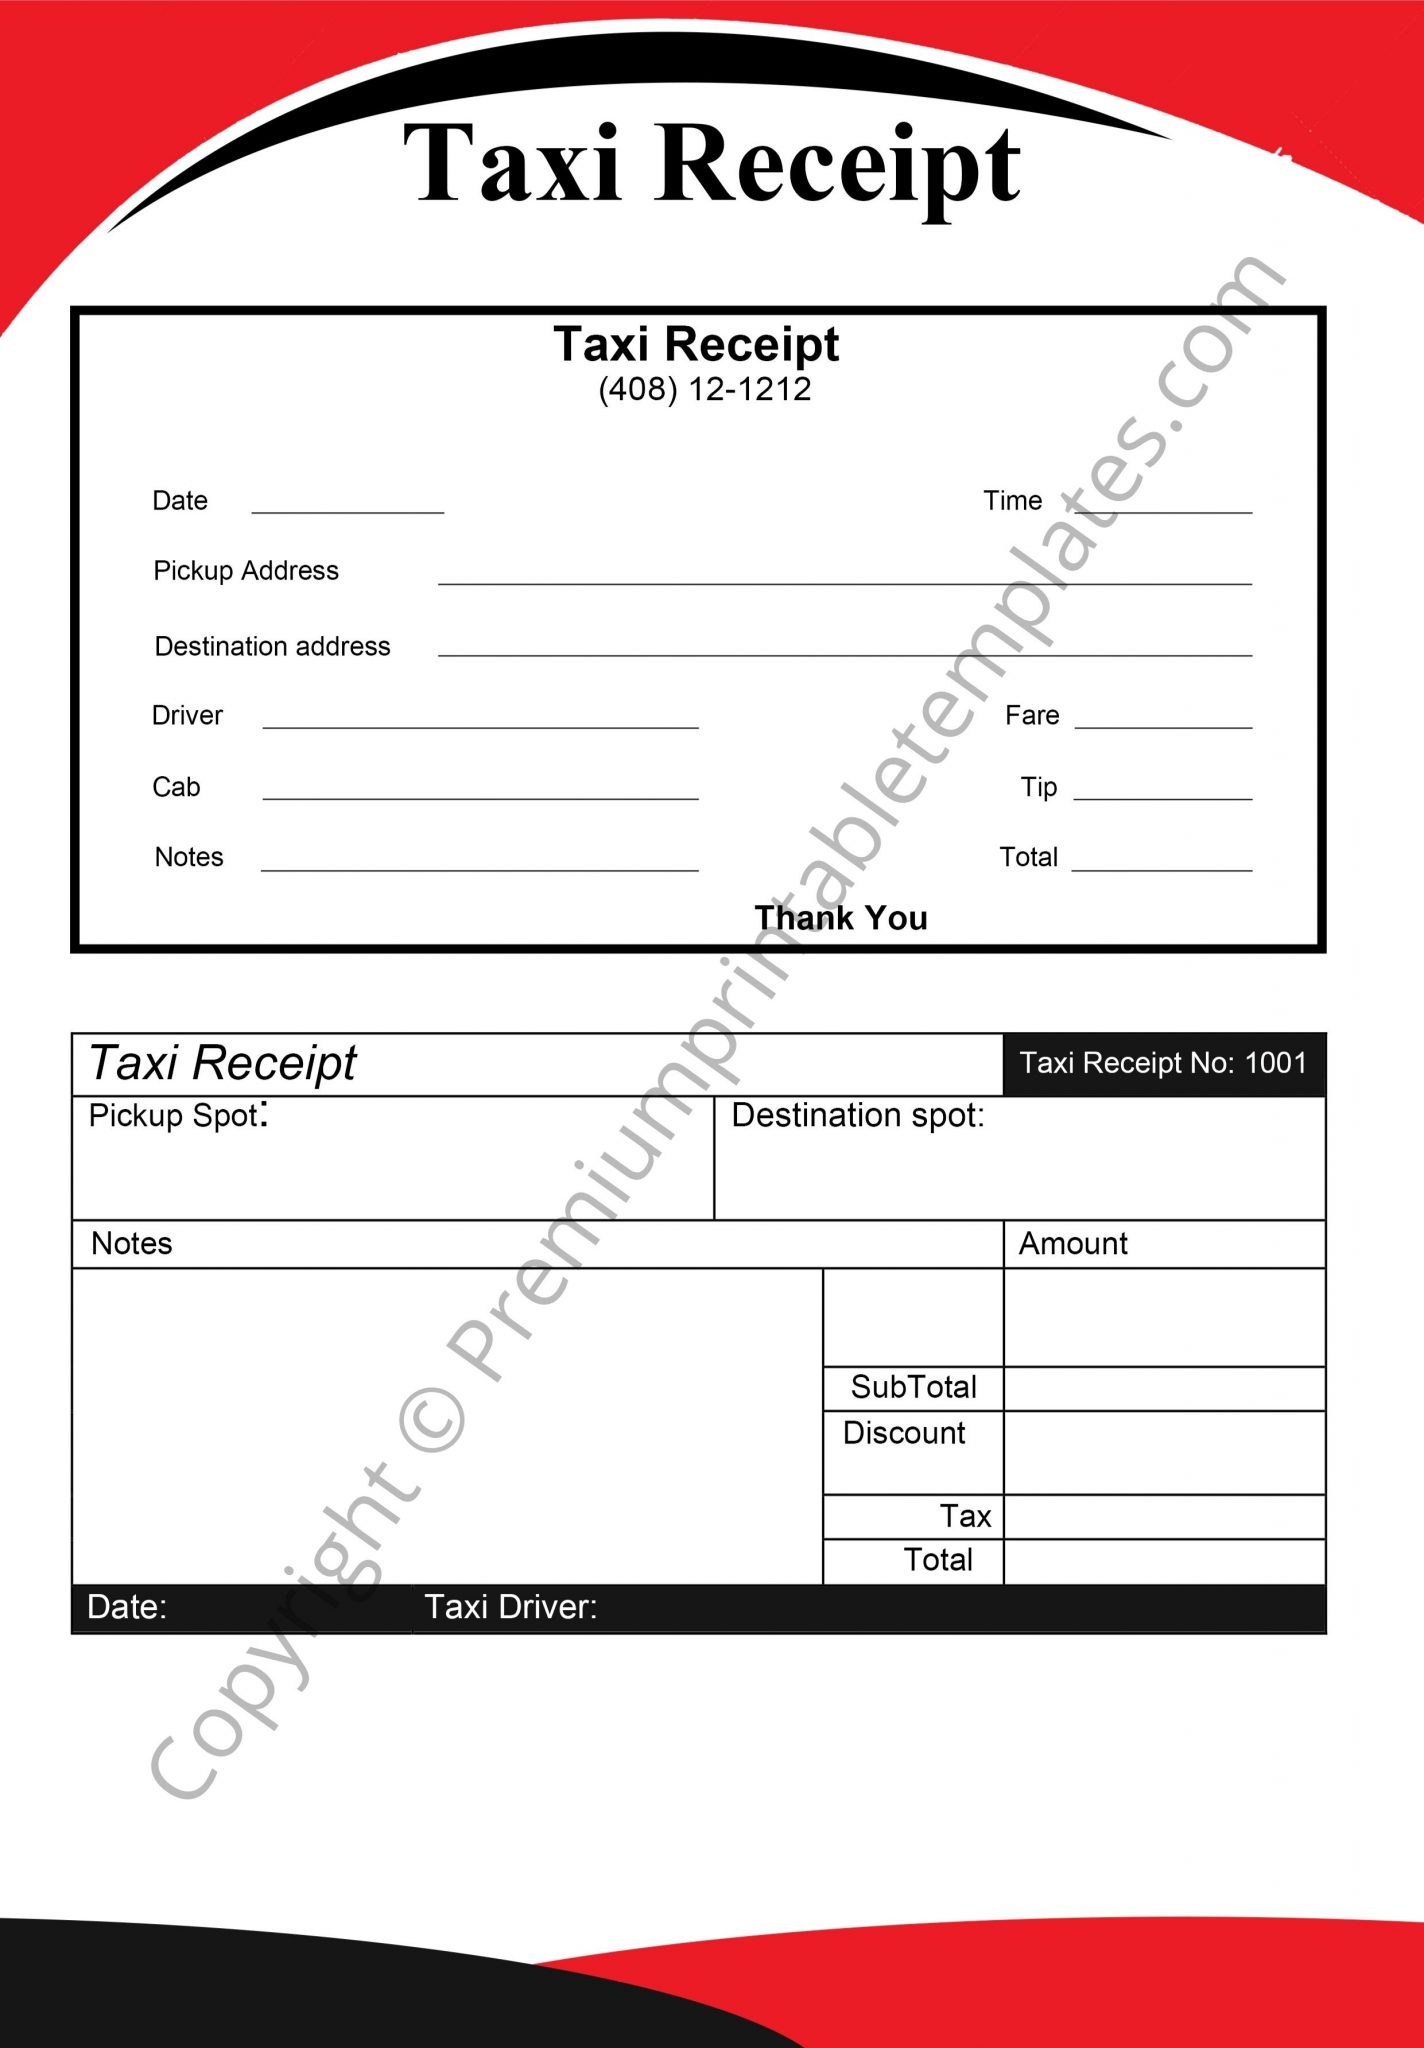 Taxi Receipt Printable Template in PDF & Word [Pack of 5]